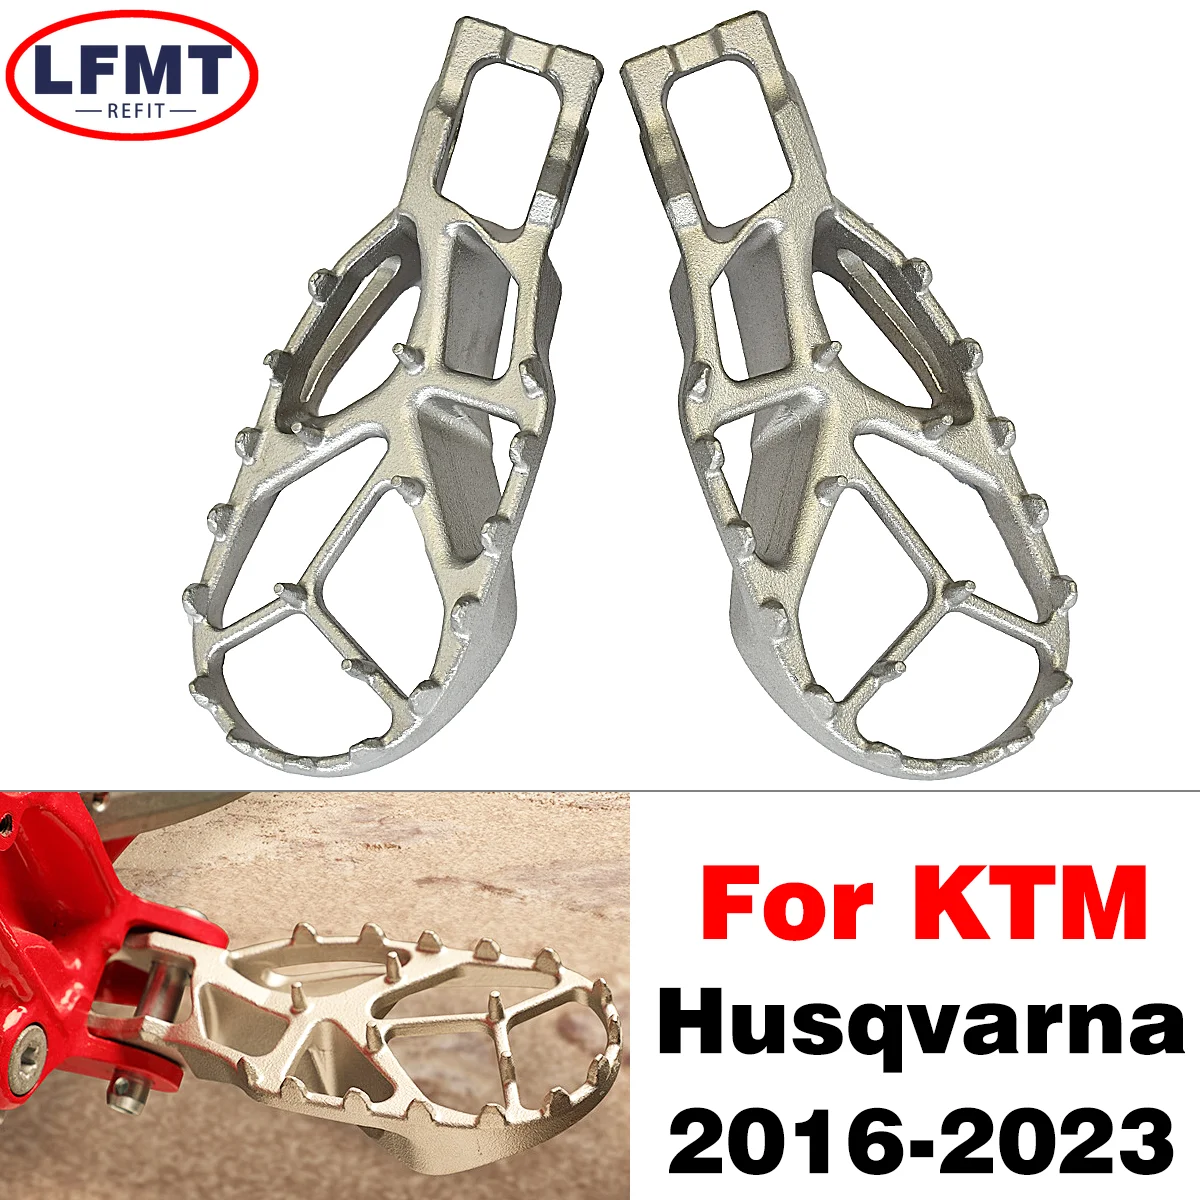 Motorcycle CNC Footrest Pedal Foot Pegs Rests For KTM 85SX SXF XCF EXC E... - $59.83